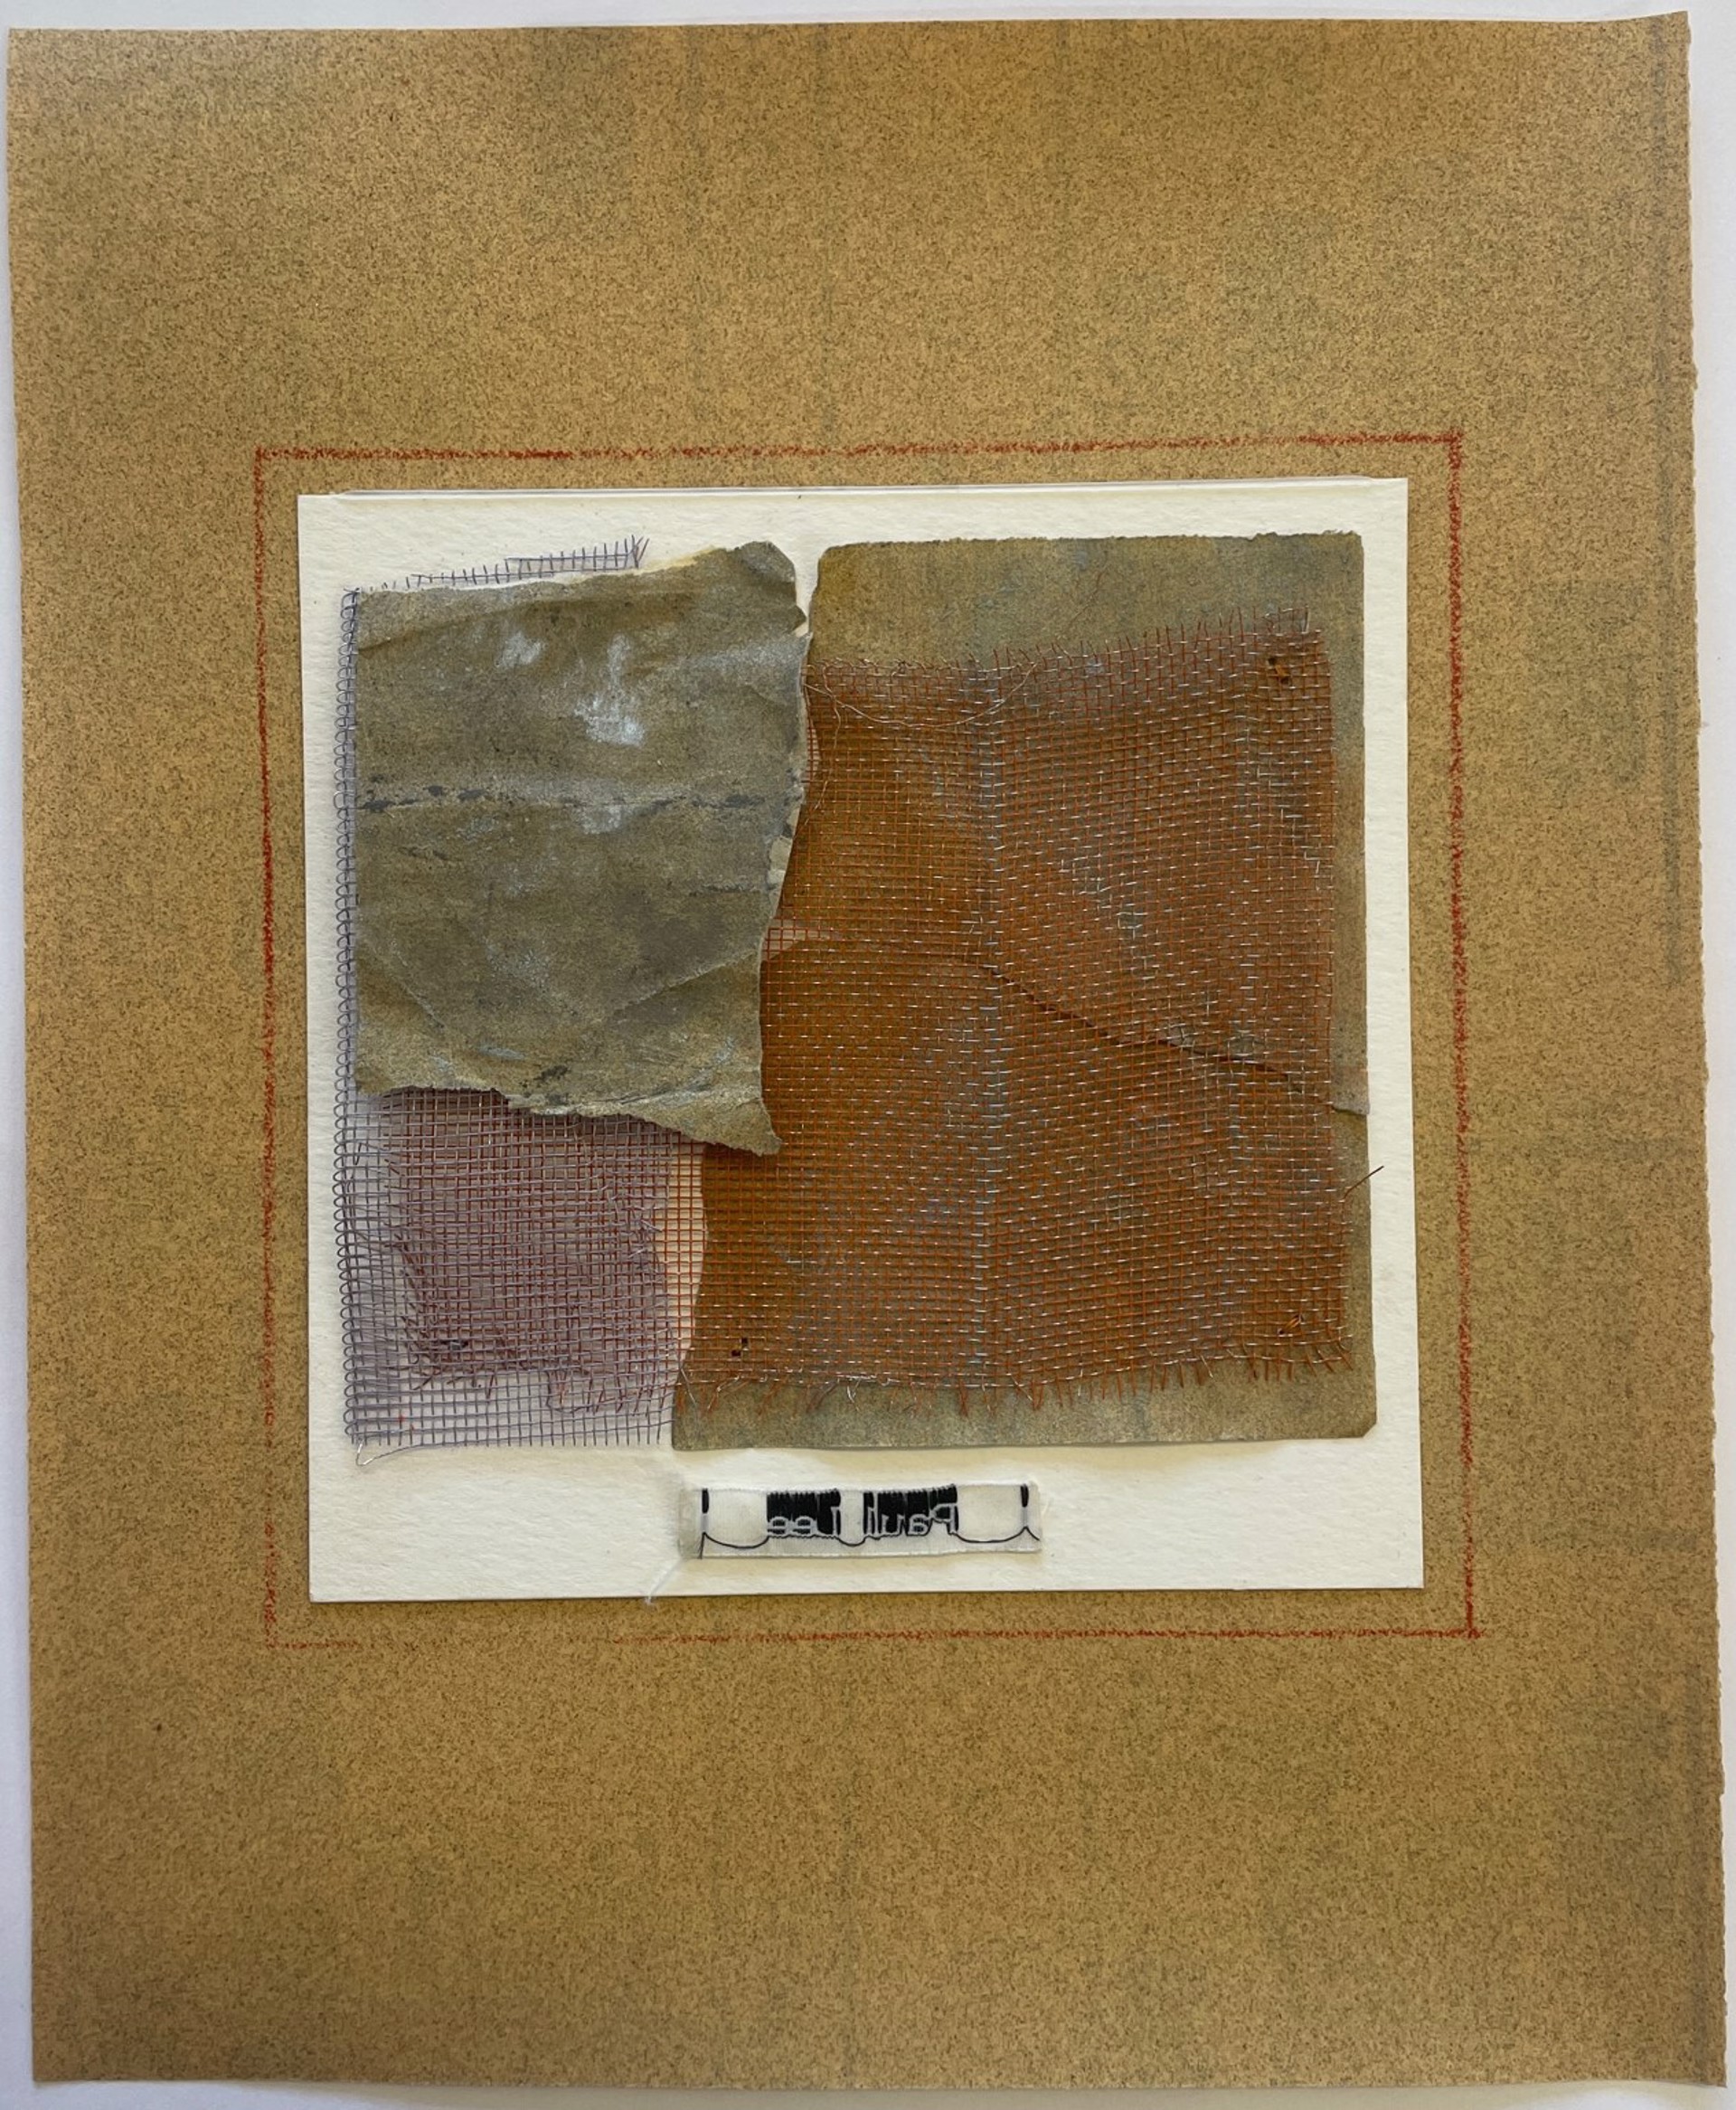 Sandpaper Collage No. 15 by Paul Lee